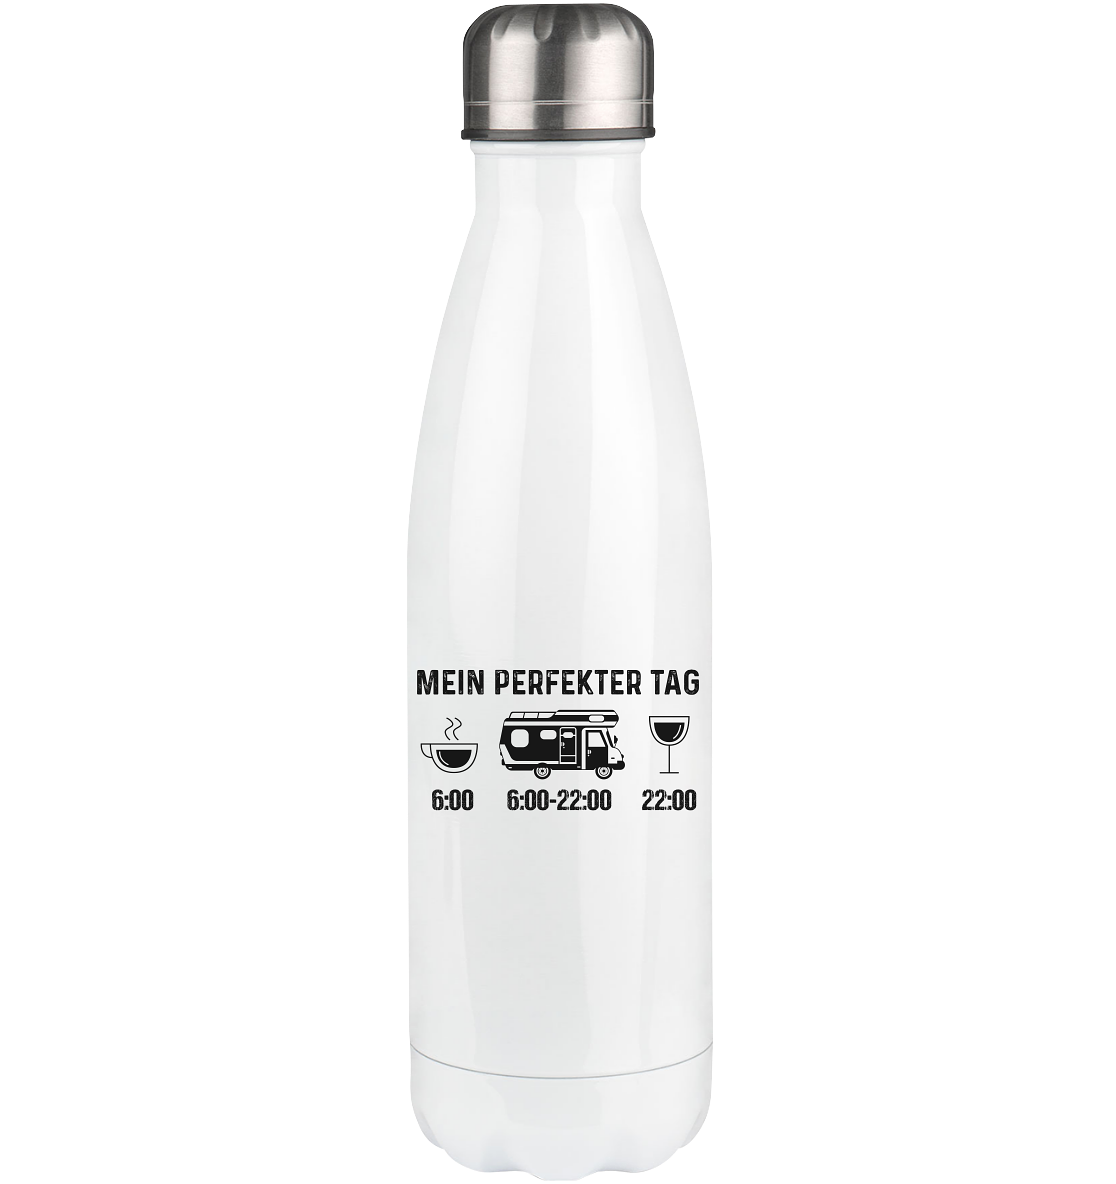 Mein Perfekter Tag - Edelstahl Thermosflasche camping 500ml